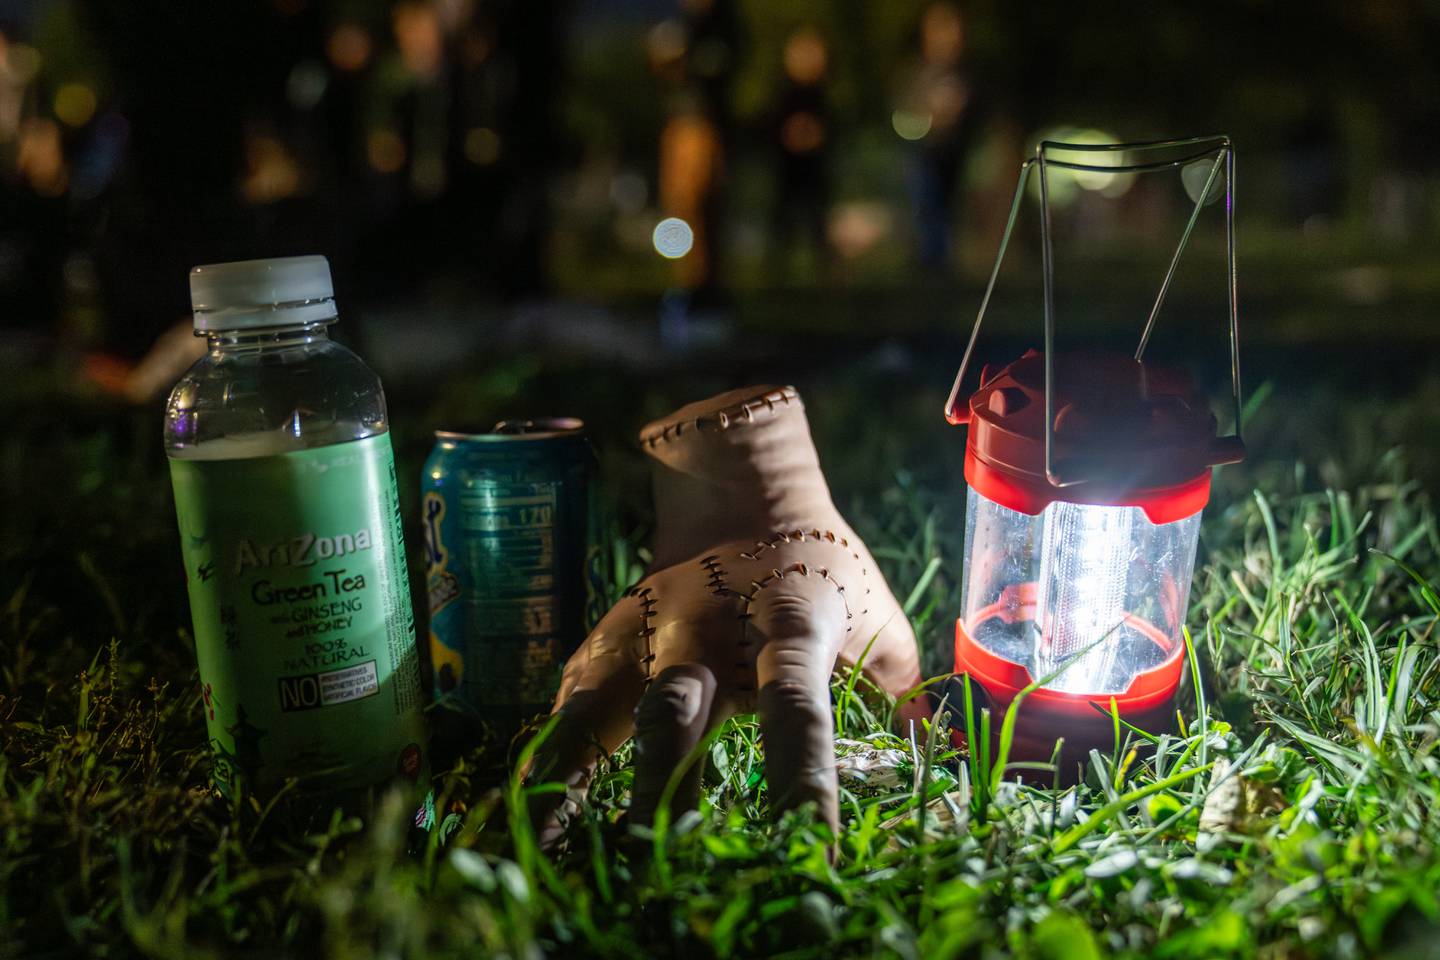 A prop hand lies in the grass during The Great Halloween Lantern Parade & Festival at Patterson Park on Saturday, Oct. 21, 2023.